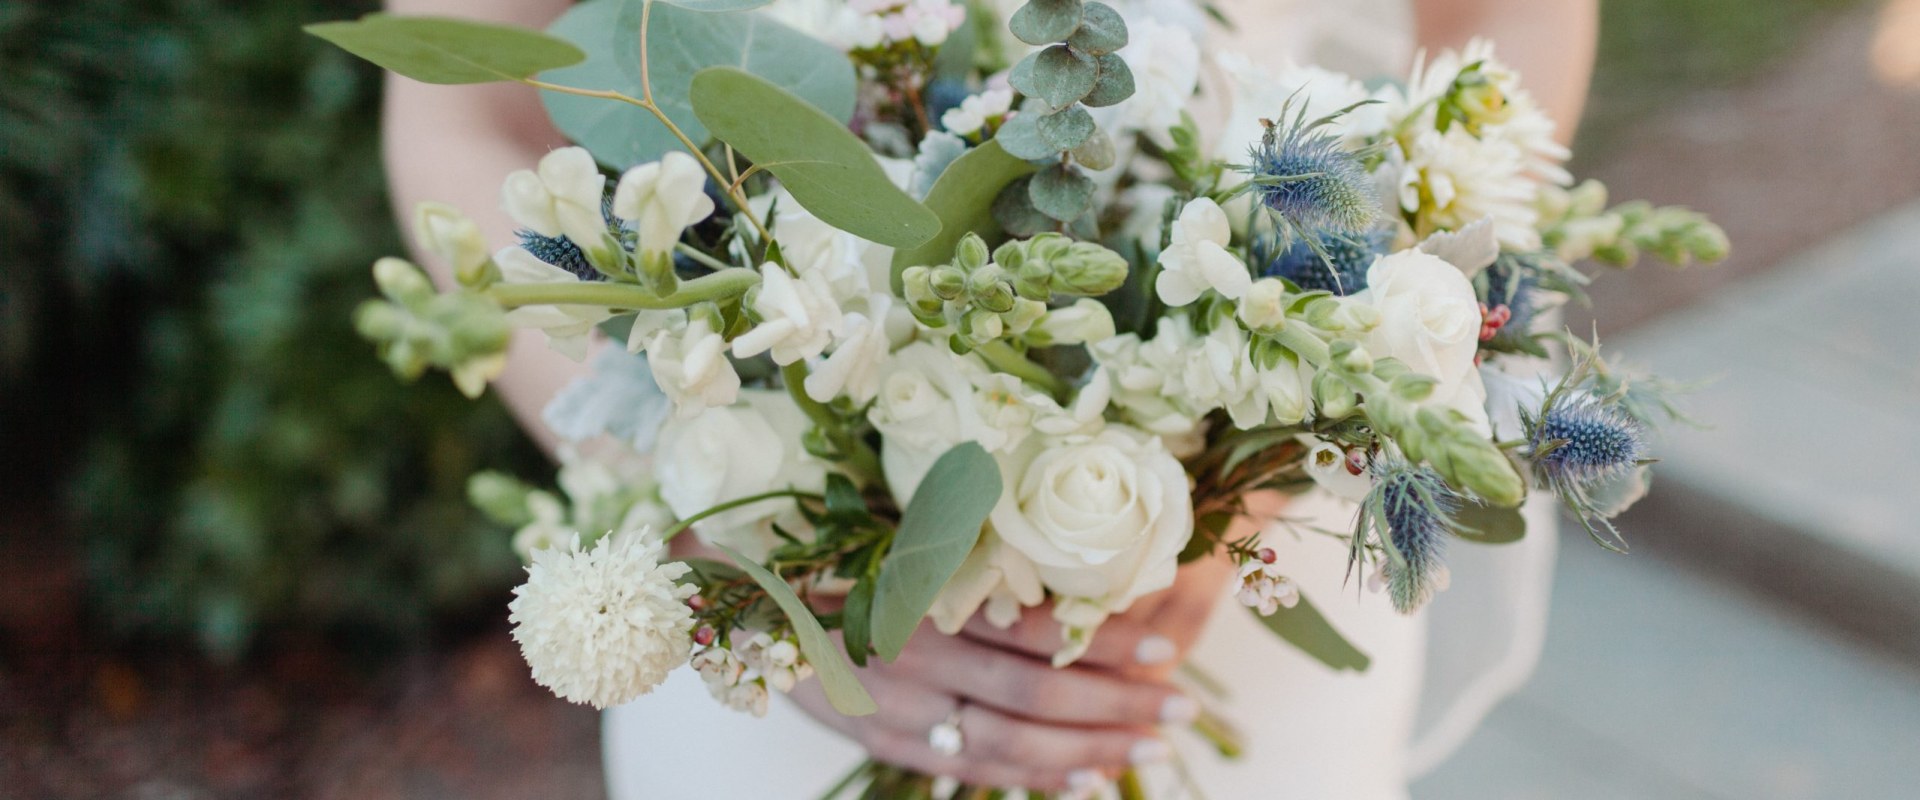 All You Need to Know About Bouquets and Centerpieces for Your Arizona Wedding